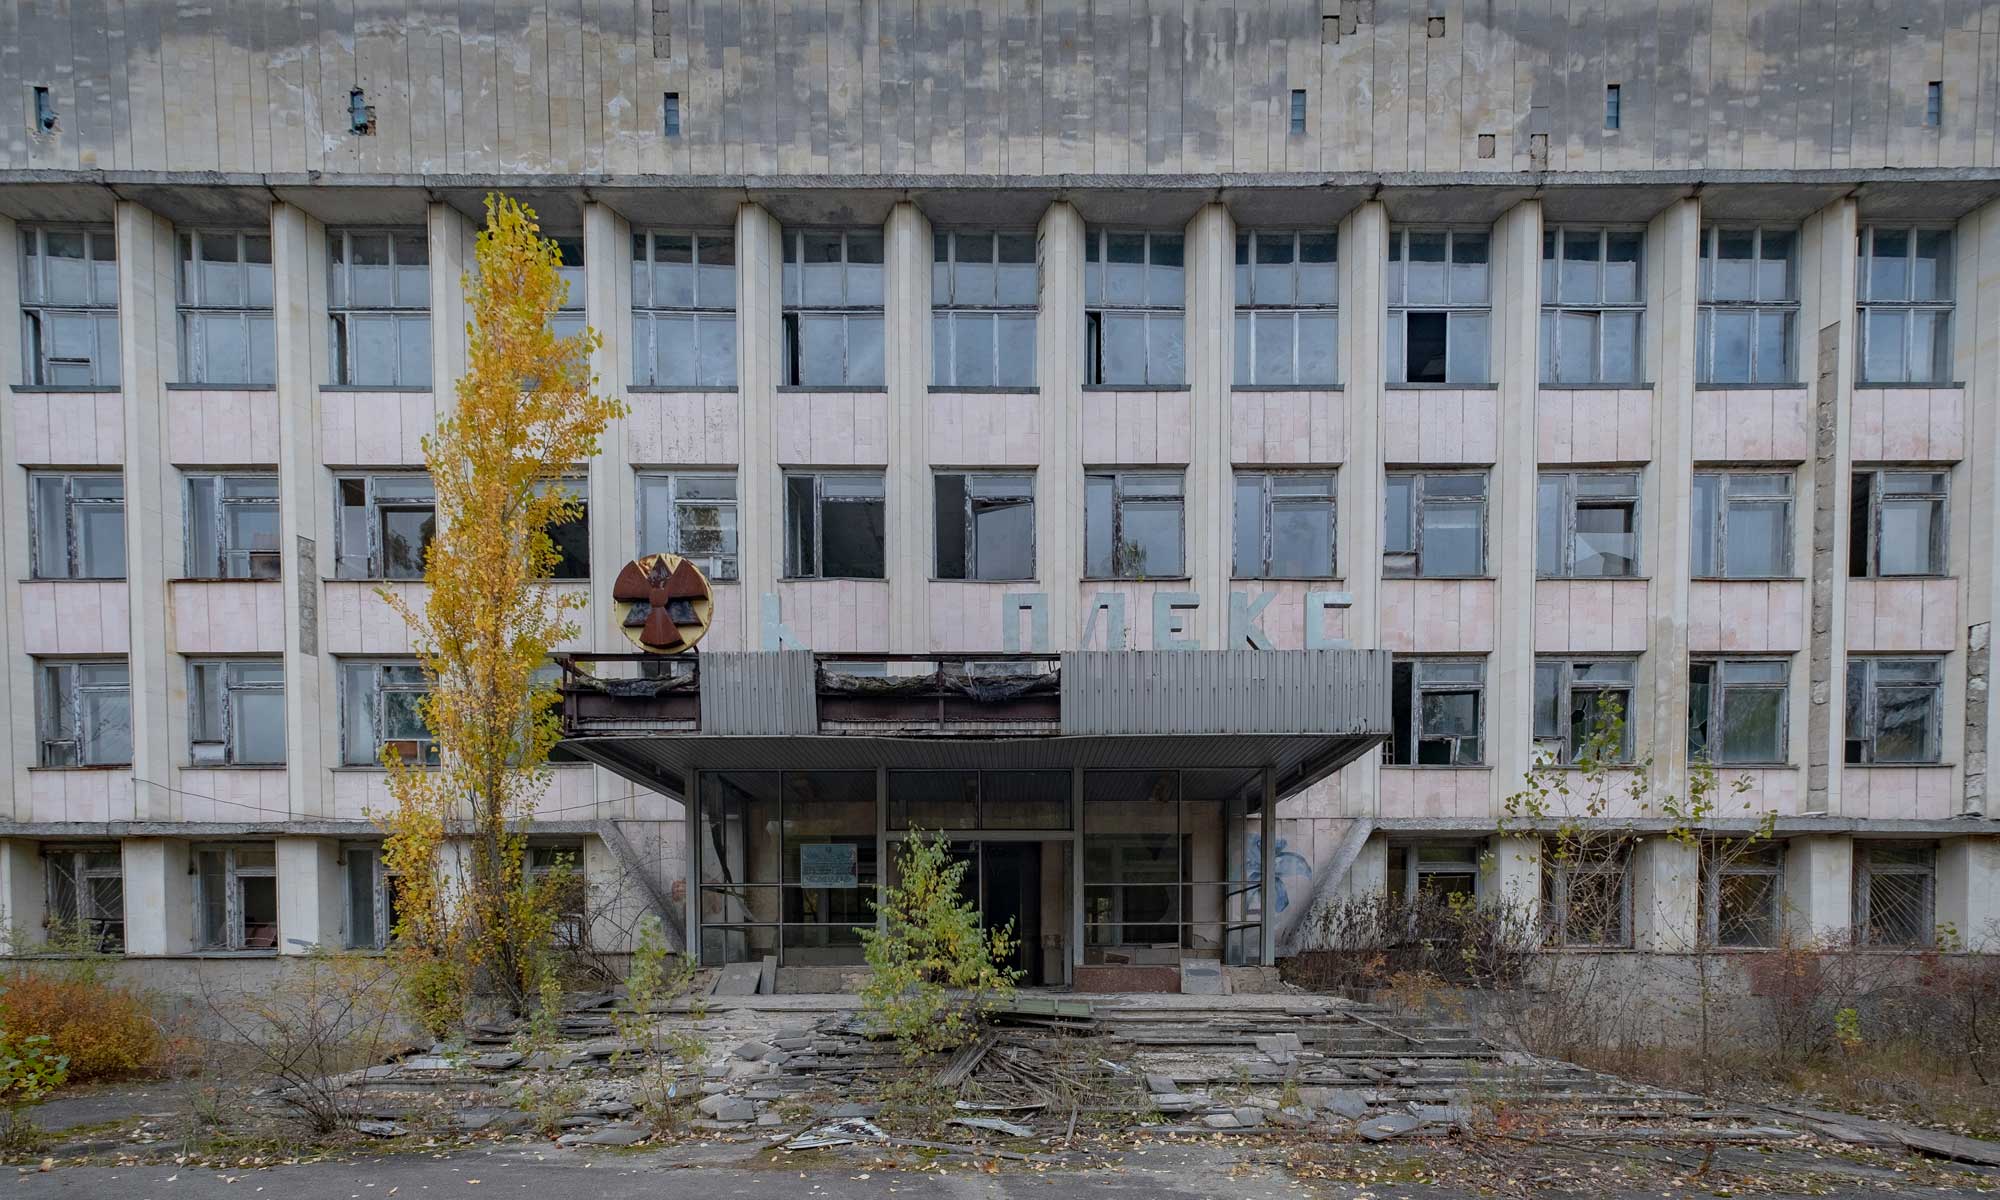 An abandoned hotel in the town of Pripyat in the Chernobyl Exclusion Zone in Ukraine.